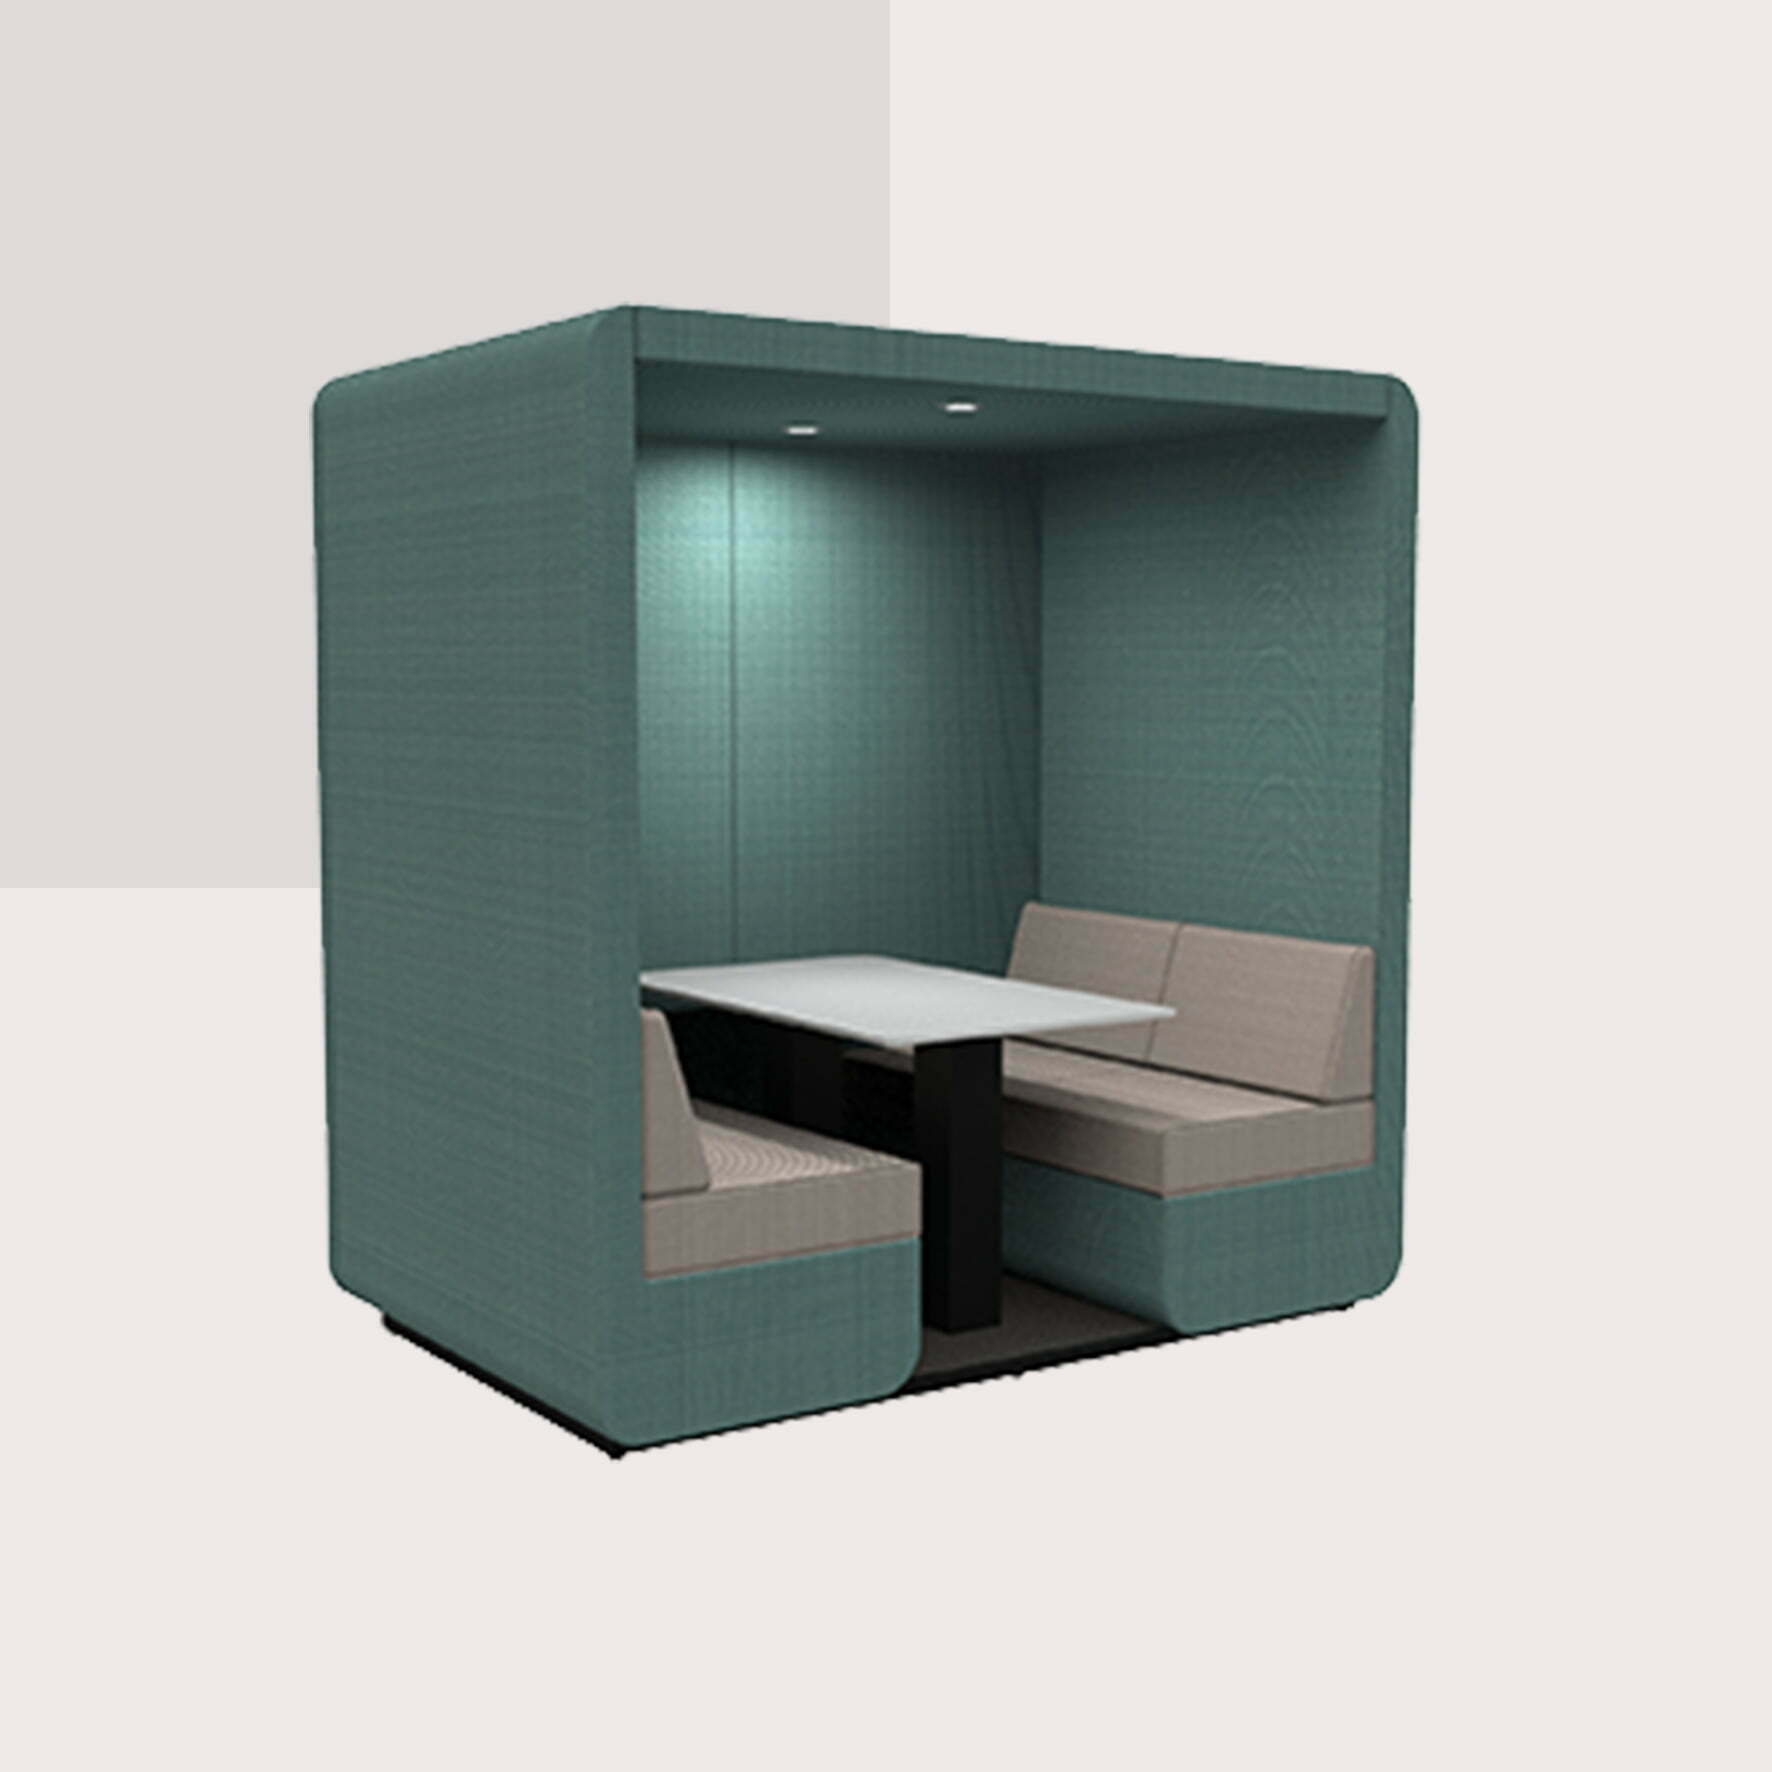 Bob 4 seat booth with upholstered end wall